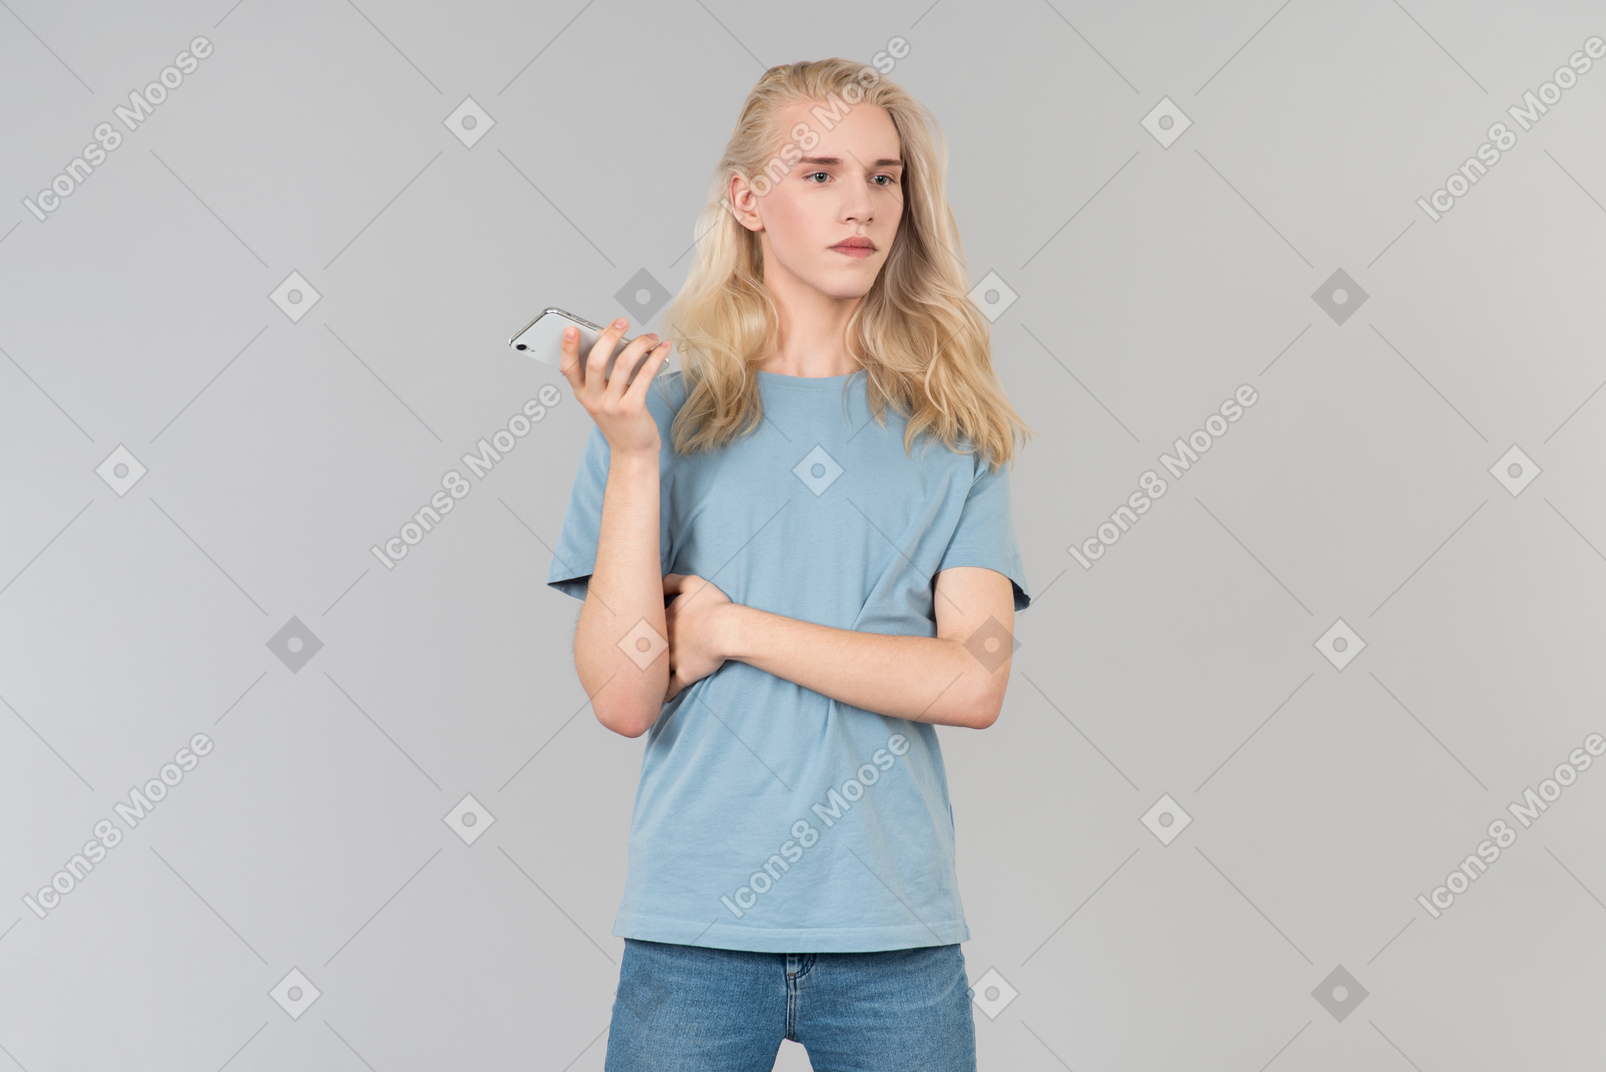 Pensive young guy with long hair holding smartphone